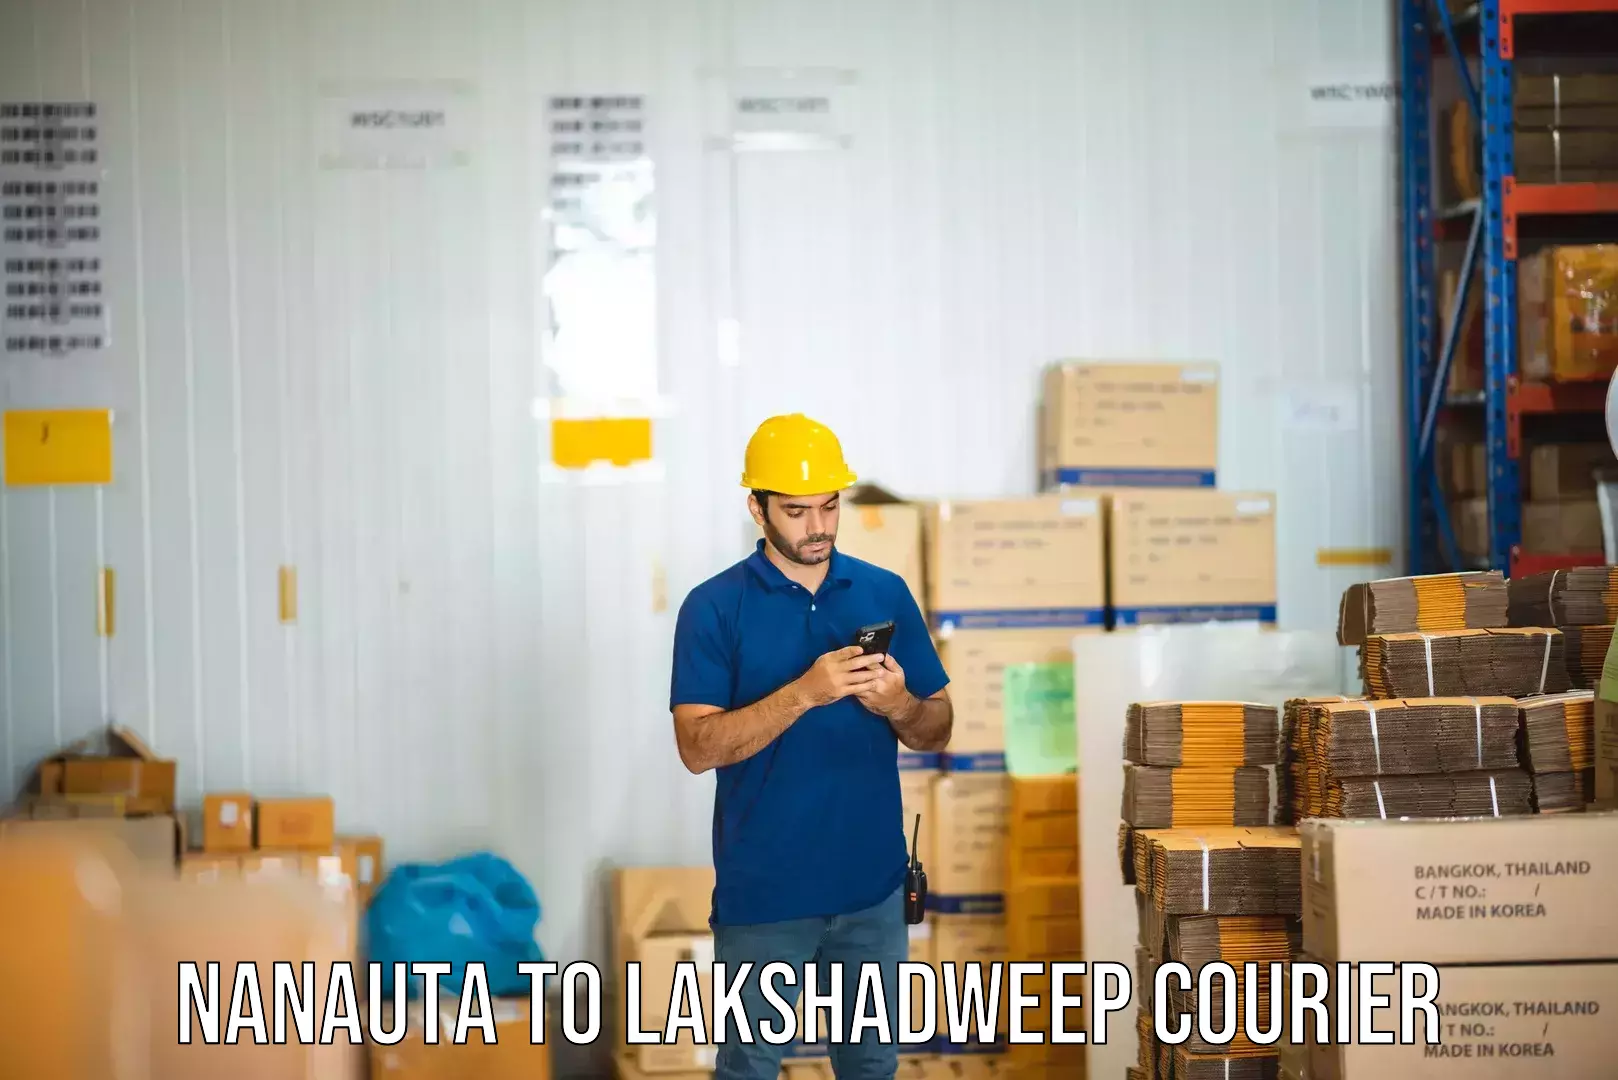 User-friendly delivery service Nanauta to Lakshadweep